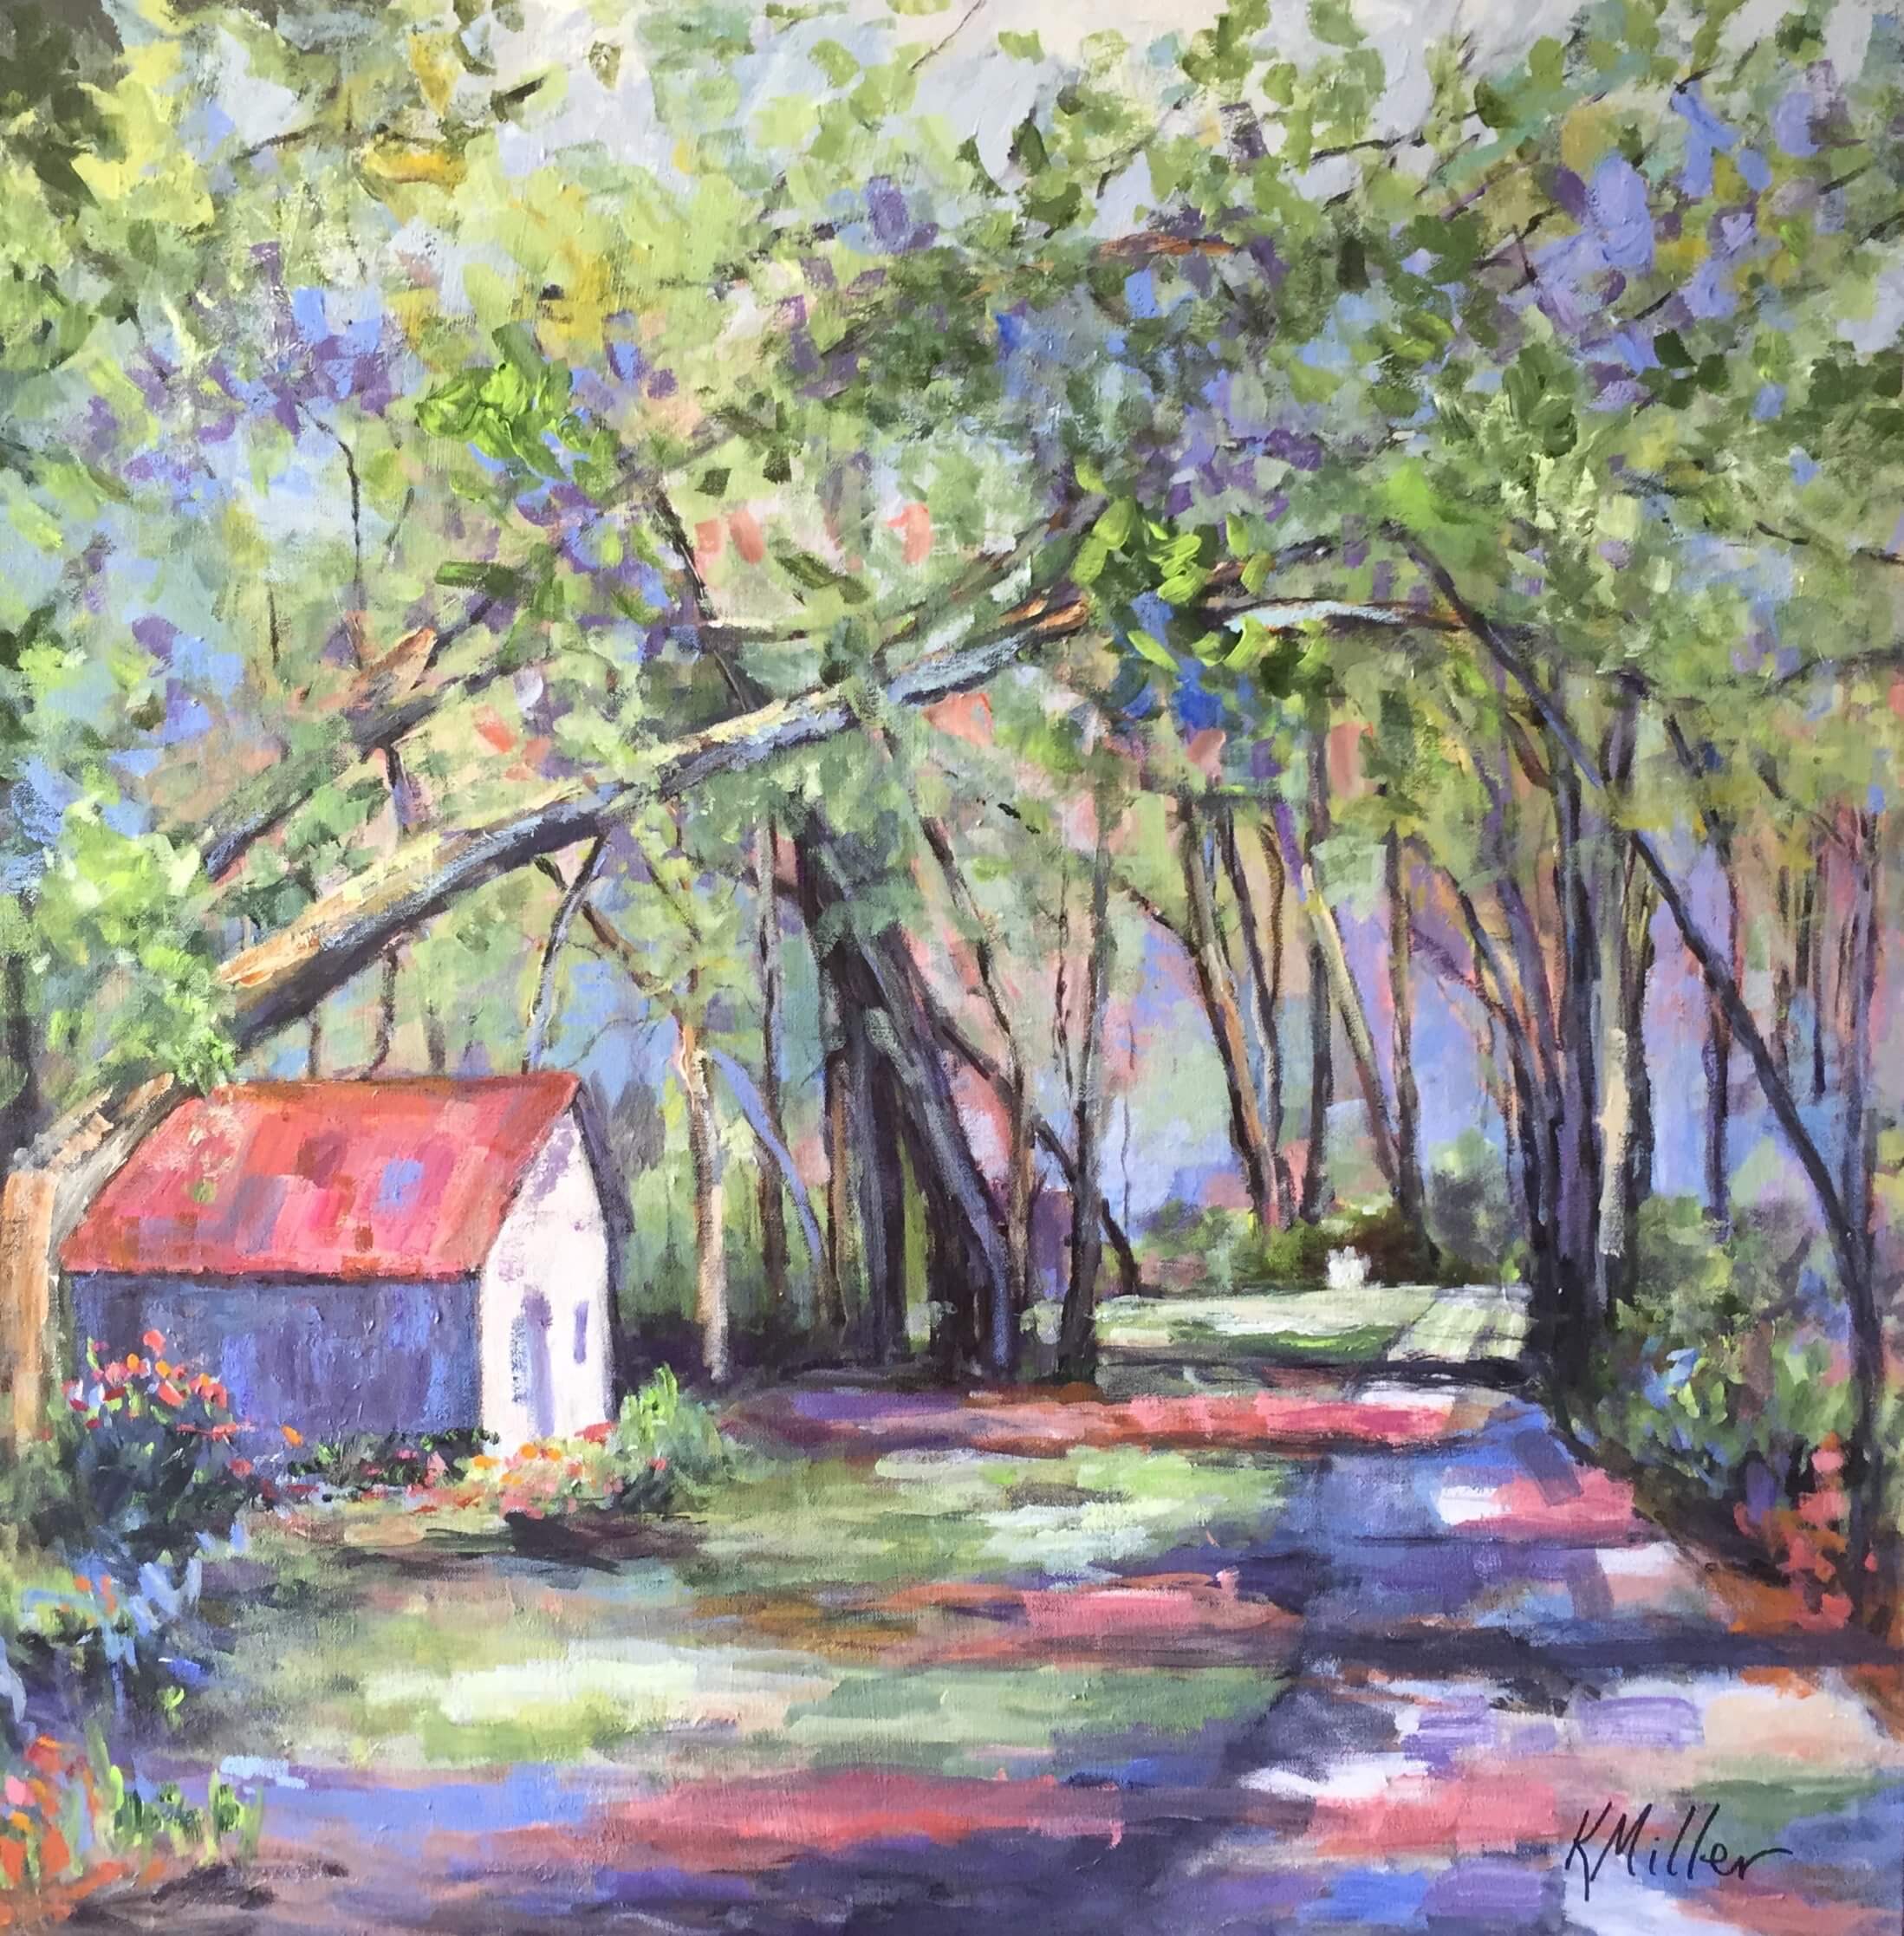 Cabin In The Oaks II 36" x 36" Acrylic on Canvas Original Kathy Miller Painting